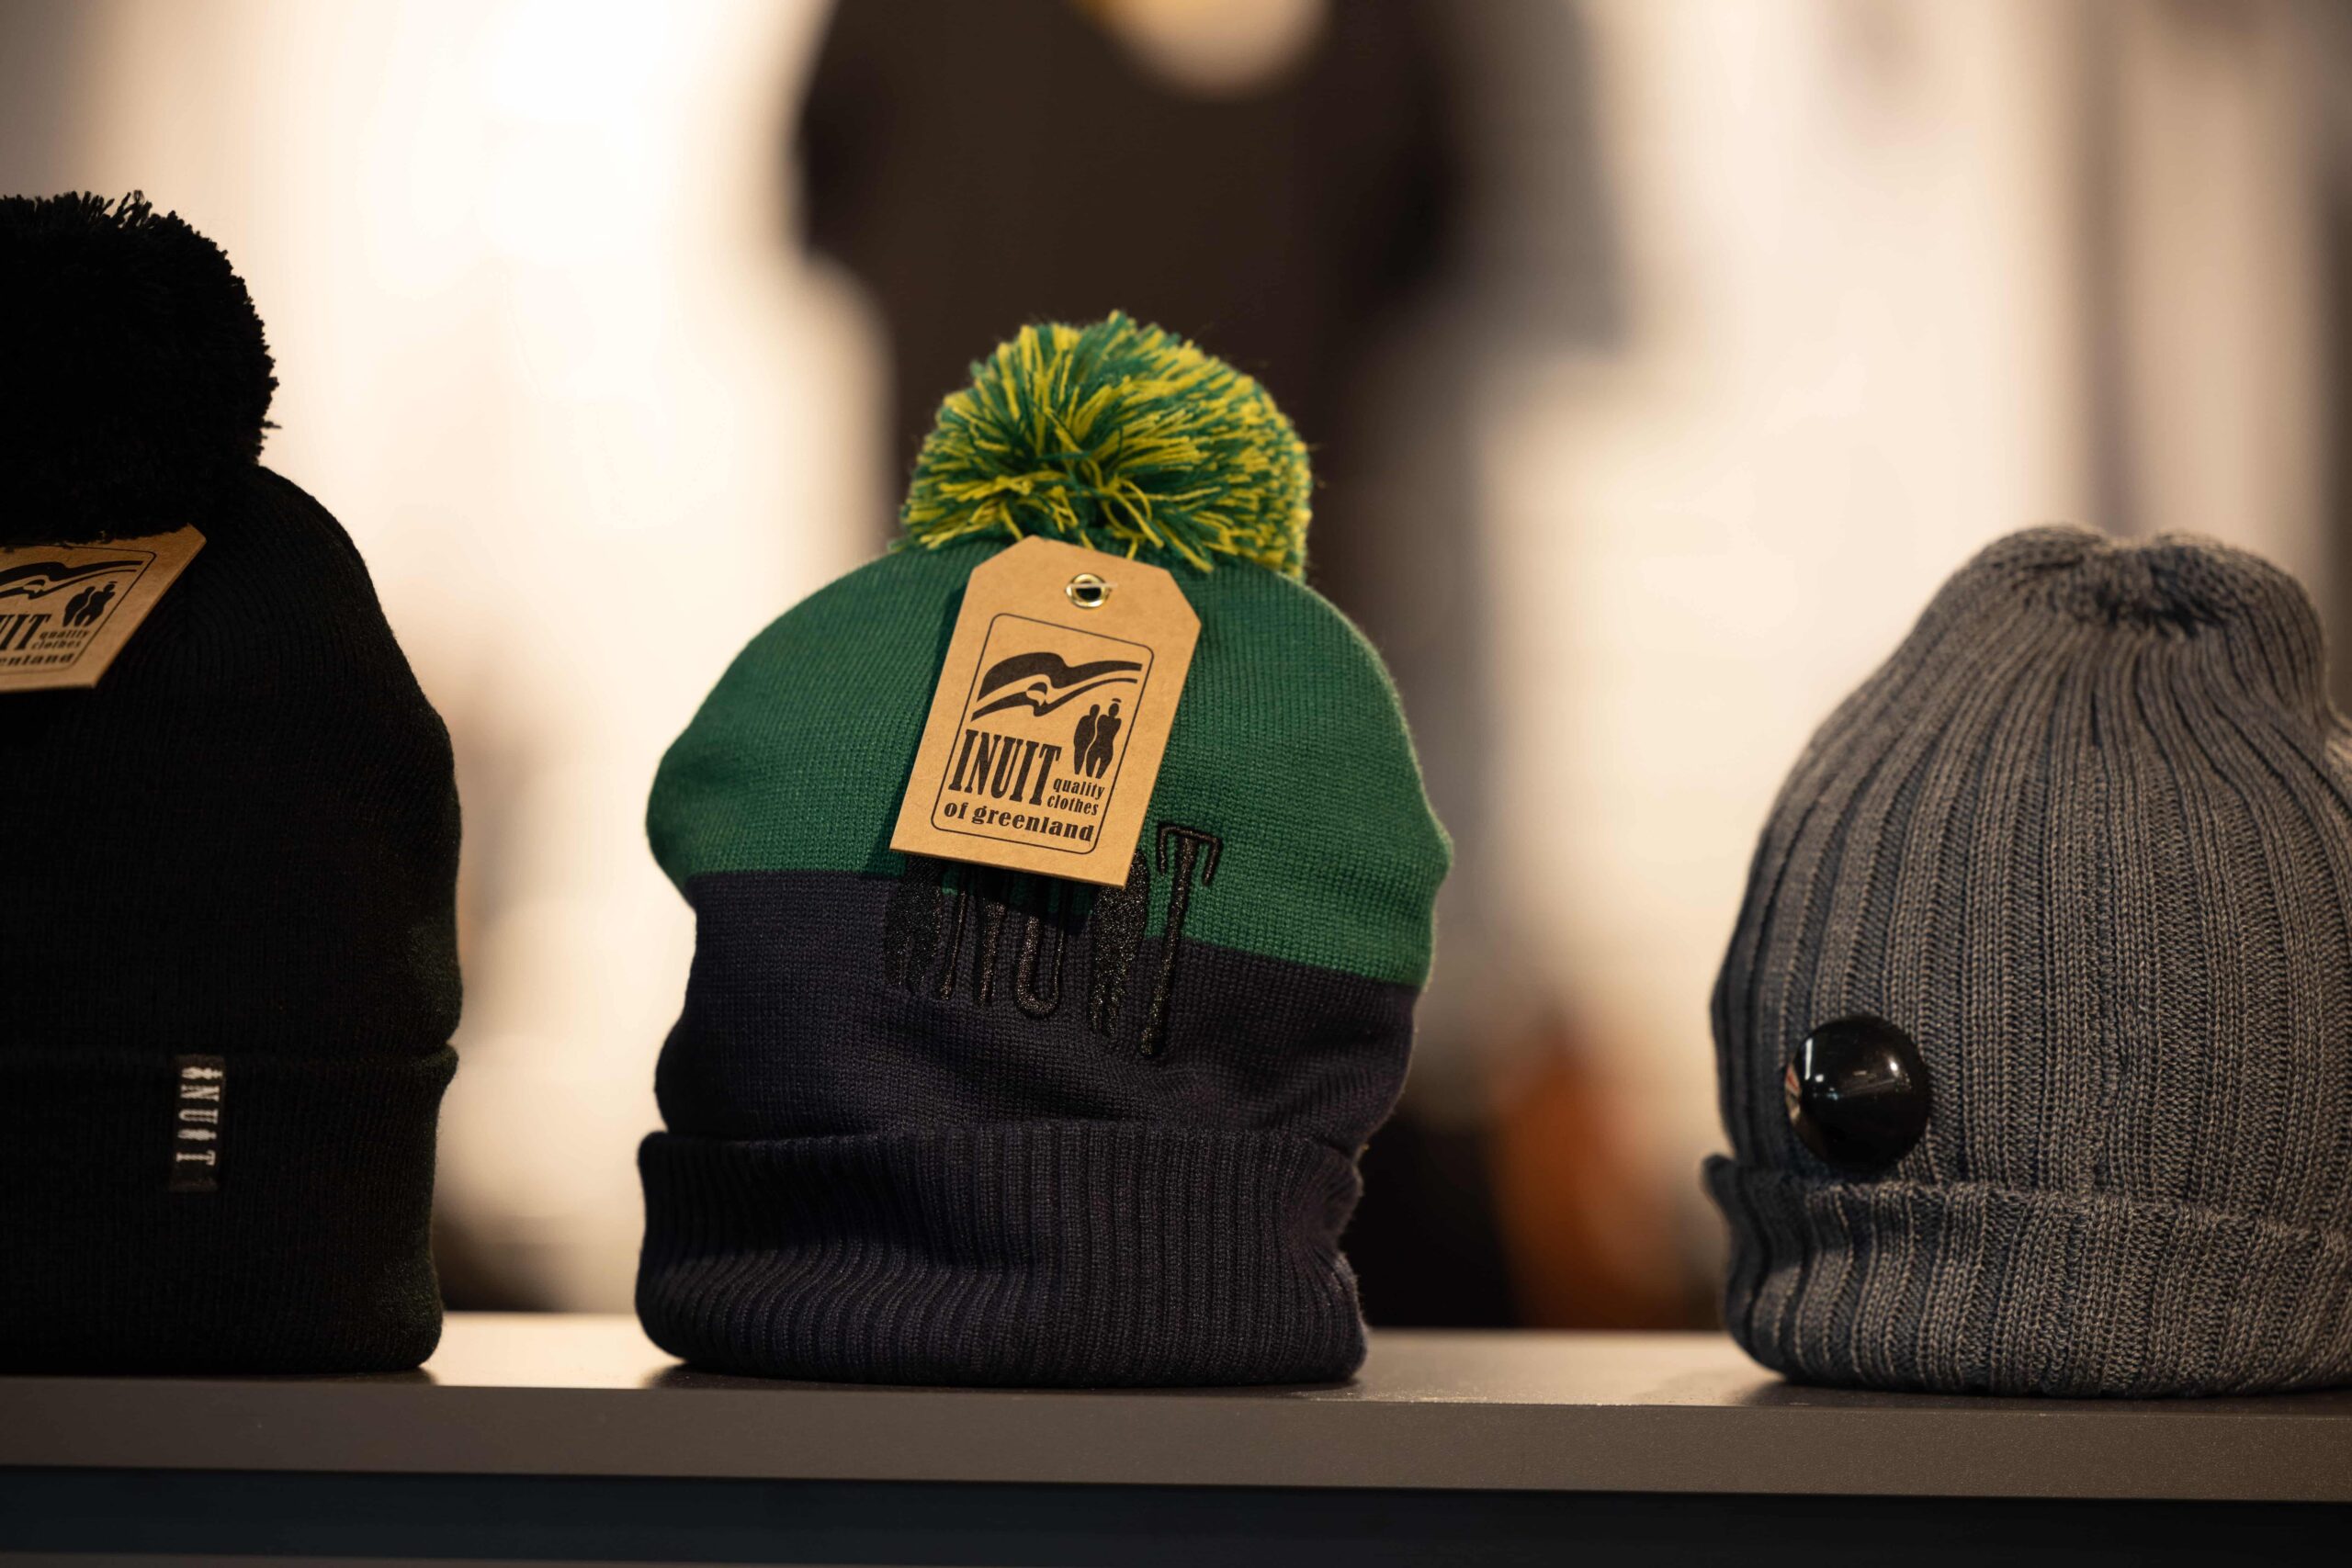 inuit-quality-beanie-in-store